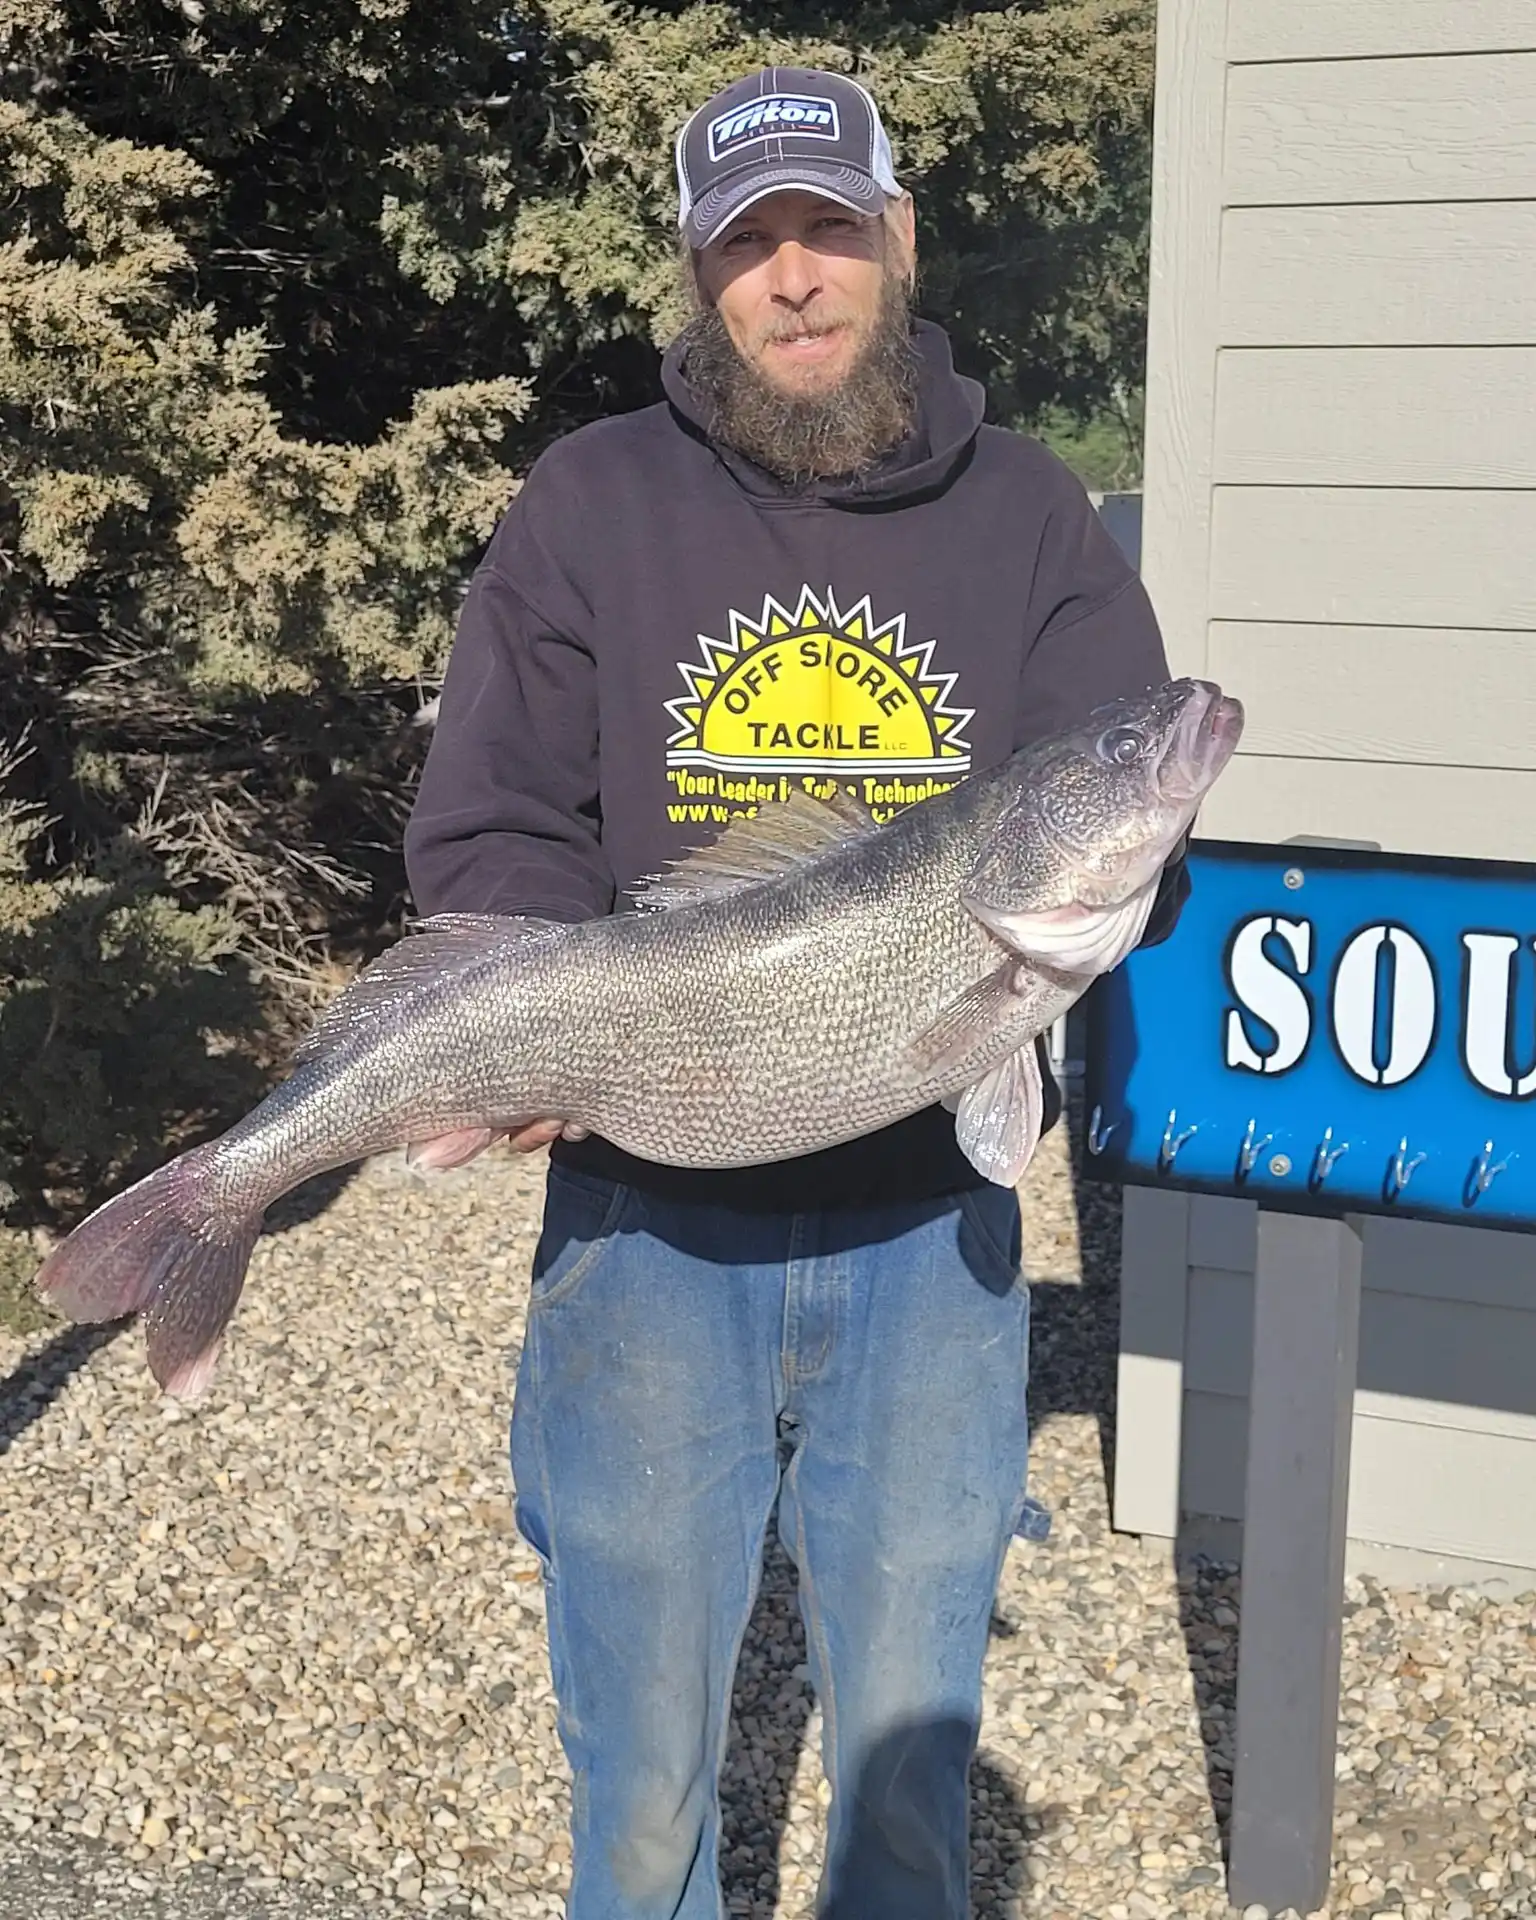 Record ND walleye caught, Blade baits still overlooked, More zander  goodness – Target Walleye